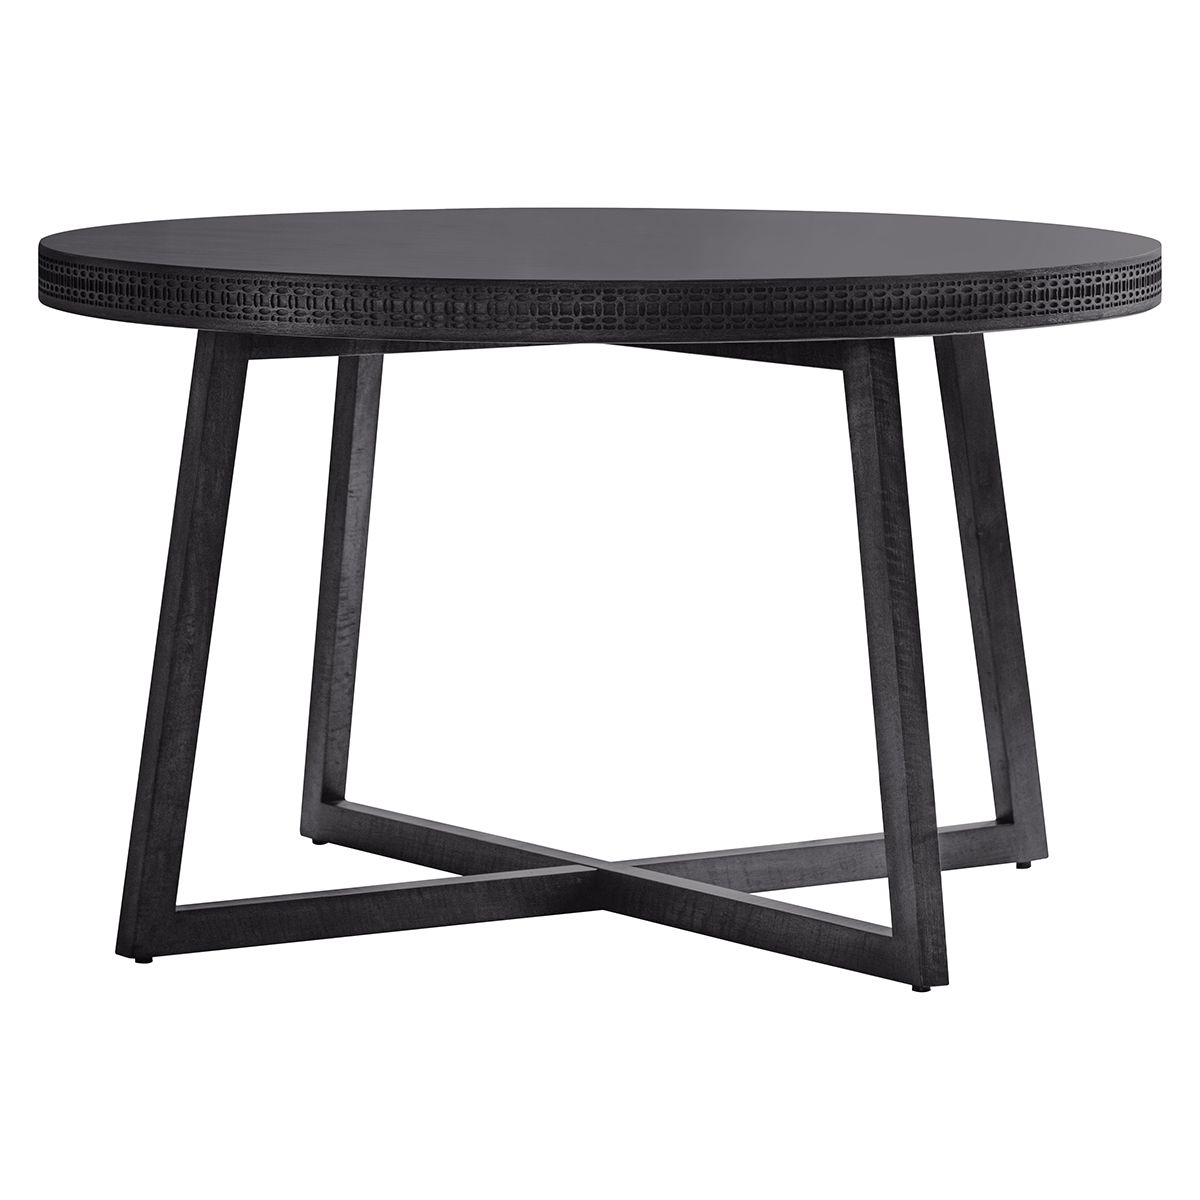 Calvera Boutique Wooden Round Dining Table in Black - Maison Rêves UK